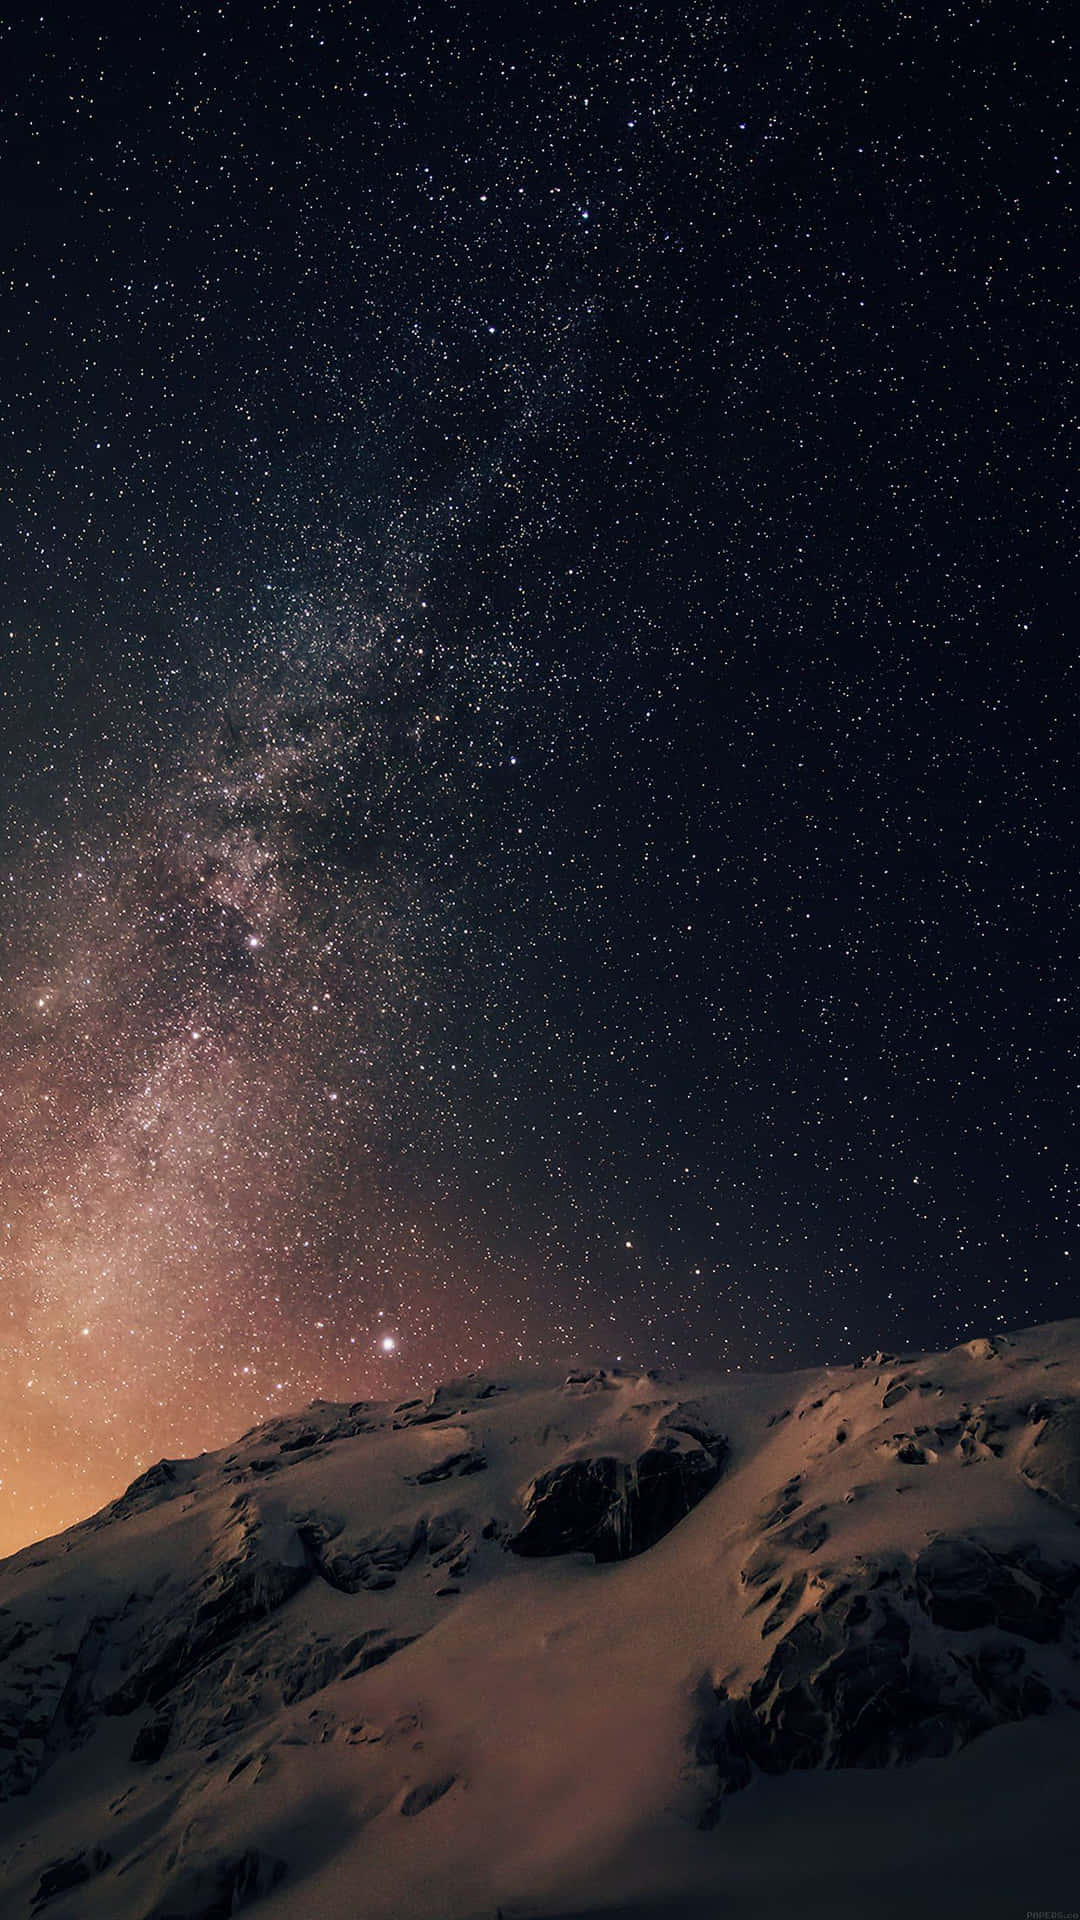 "Gaze into the starry night for a mesmerizing view of the dark sky." Wallpaper